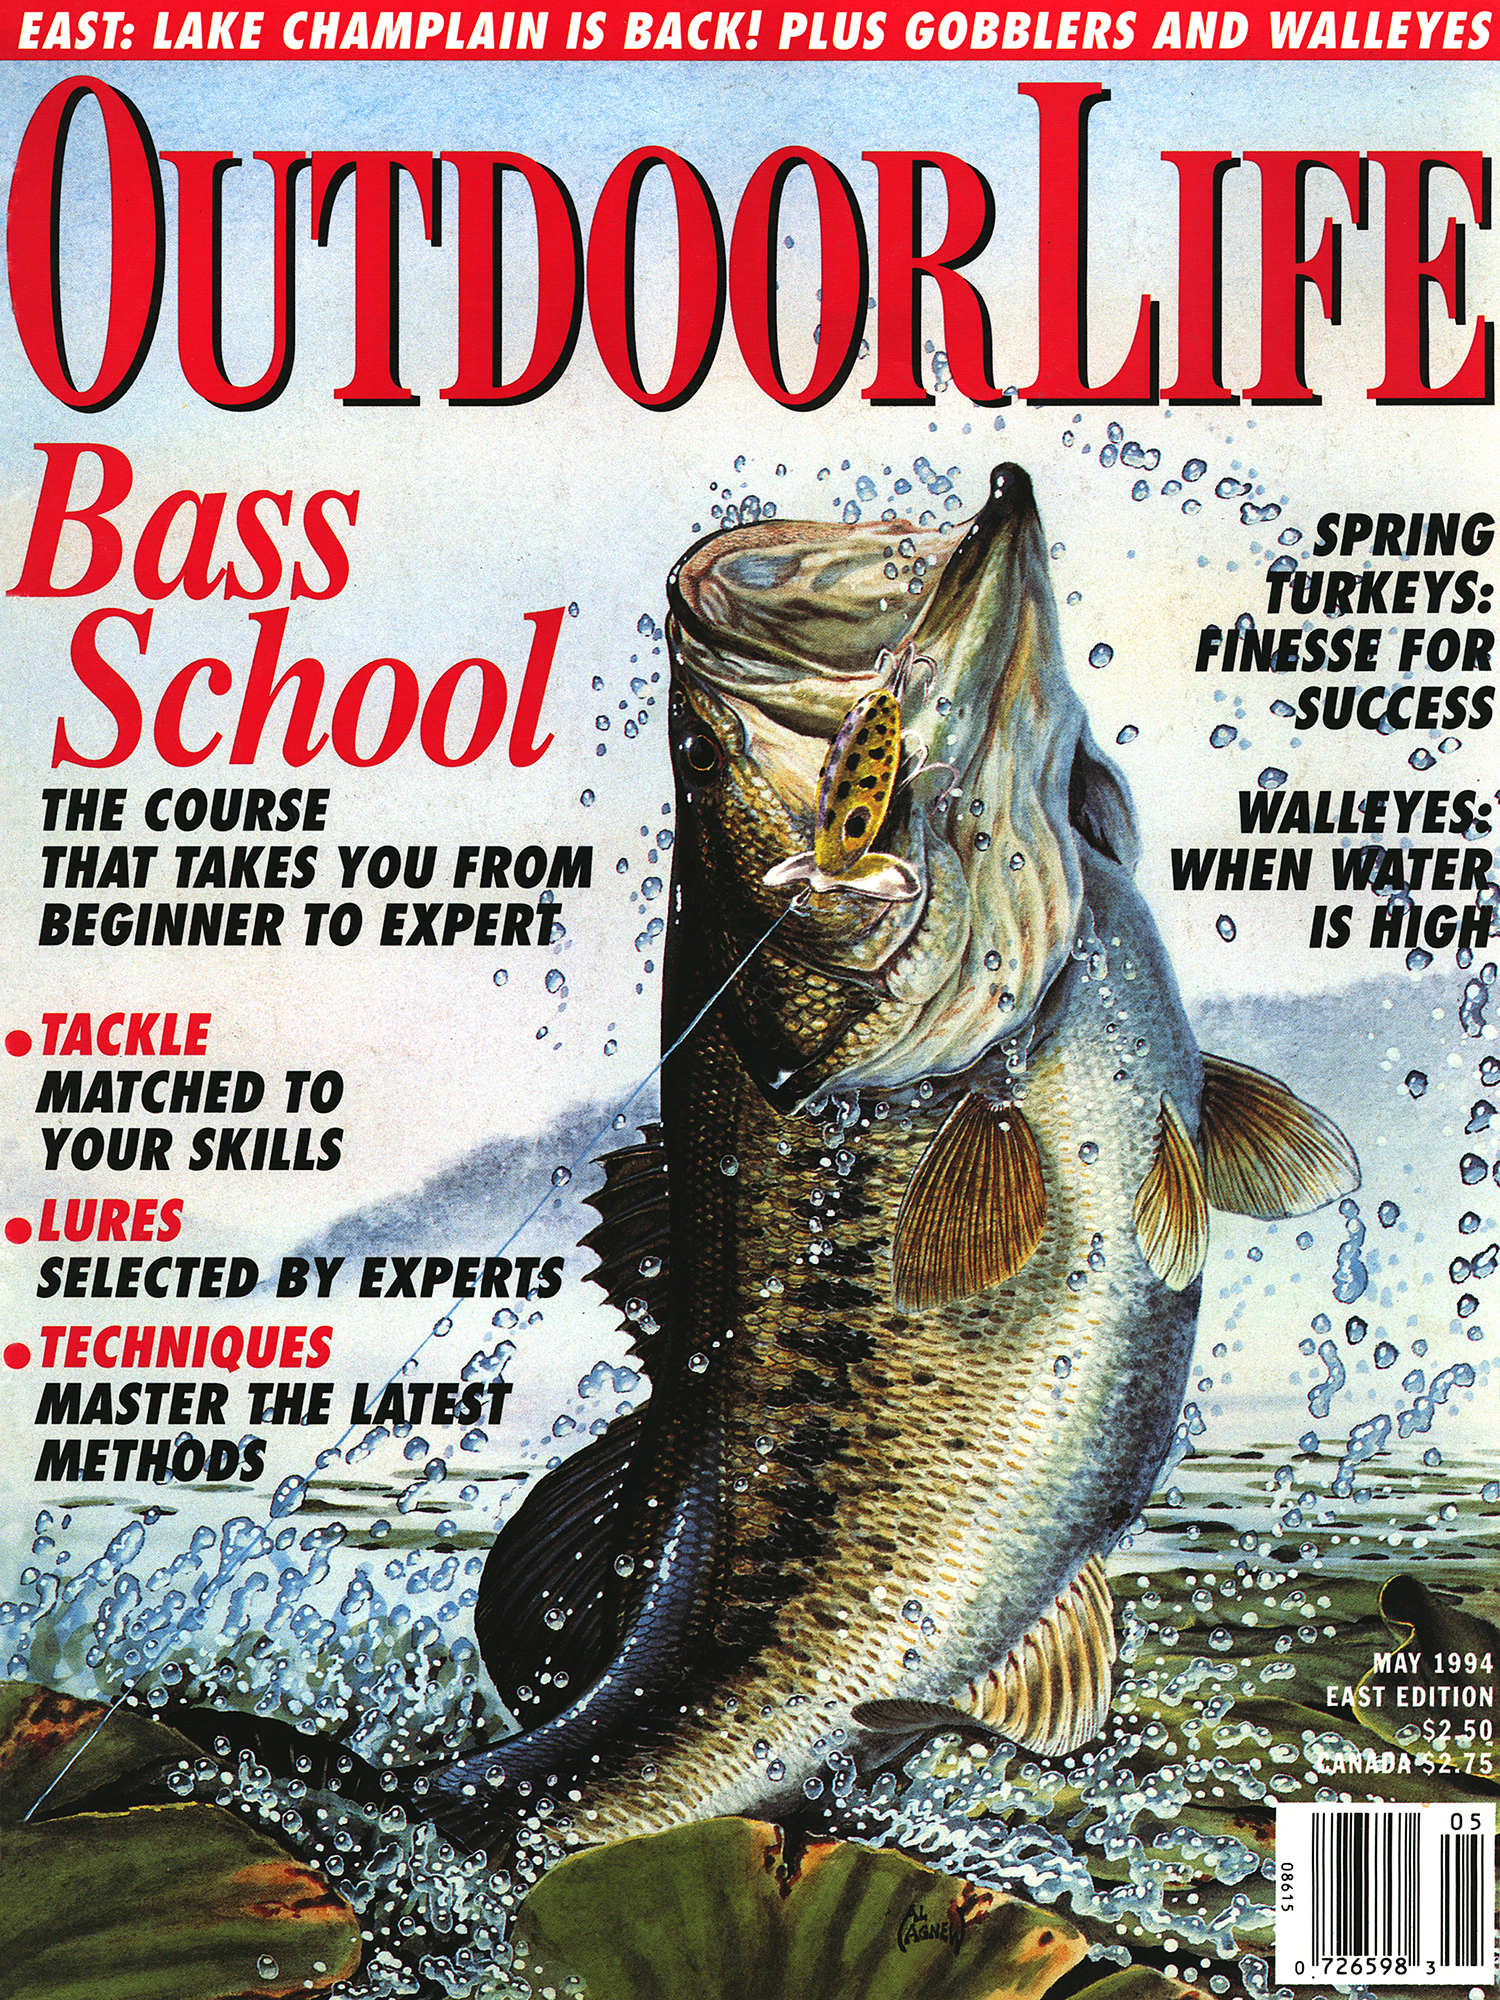 OUTDOOR LIFE MAGAZINE - HUNTING & FISHING THE ULTIMATE GUIDE